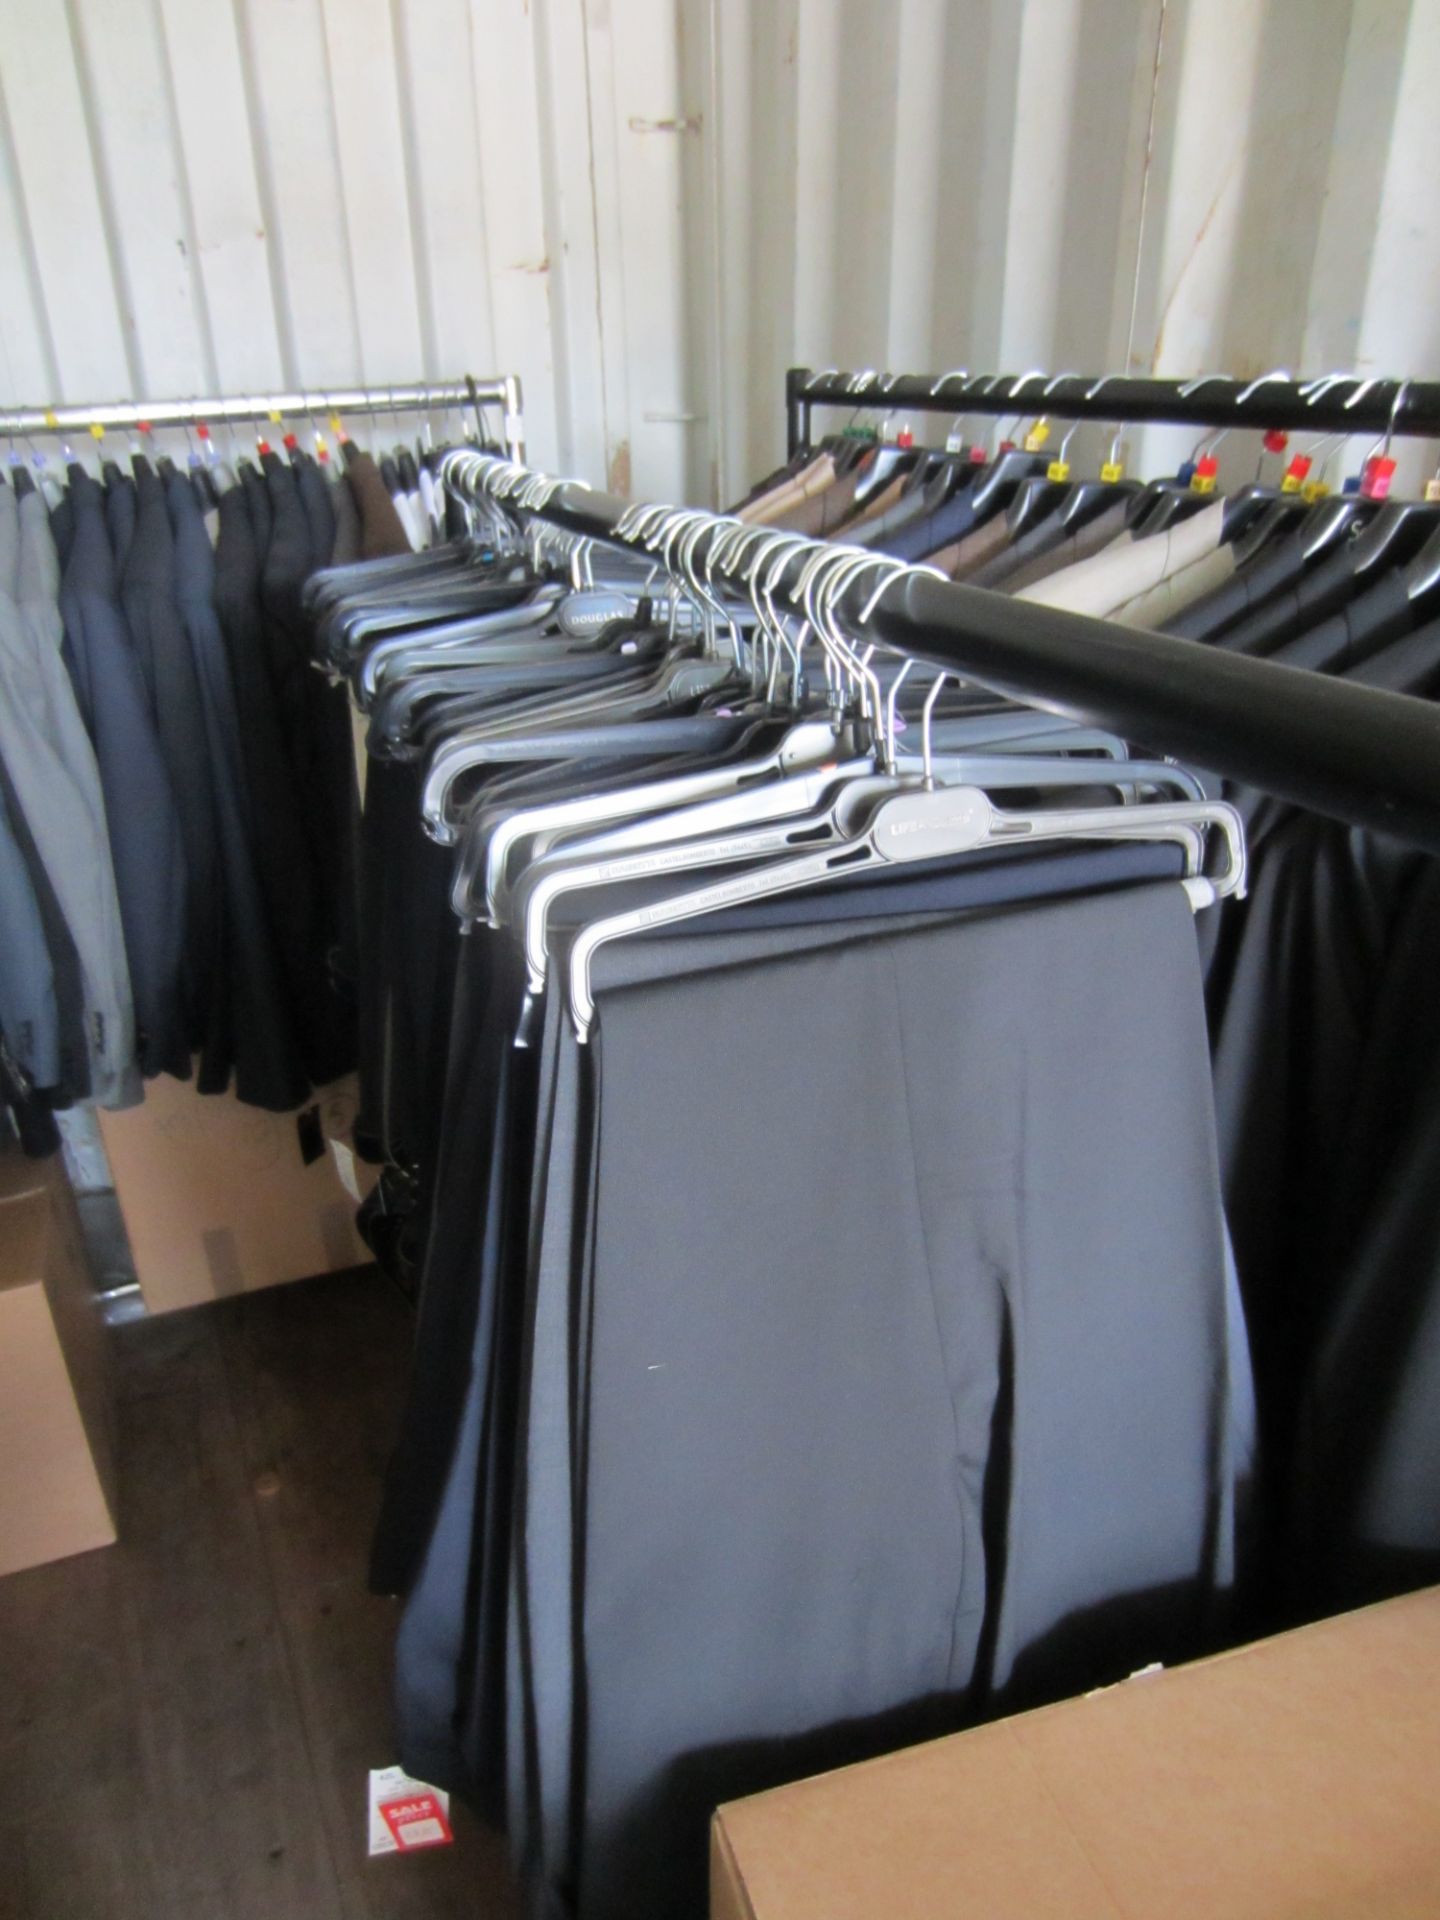 Large Quantity of Stock from a Gents Outfitters, comprising Formal Shirts, Trousers, Ties, Belts - Image 3 of 9